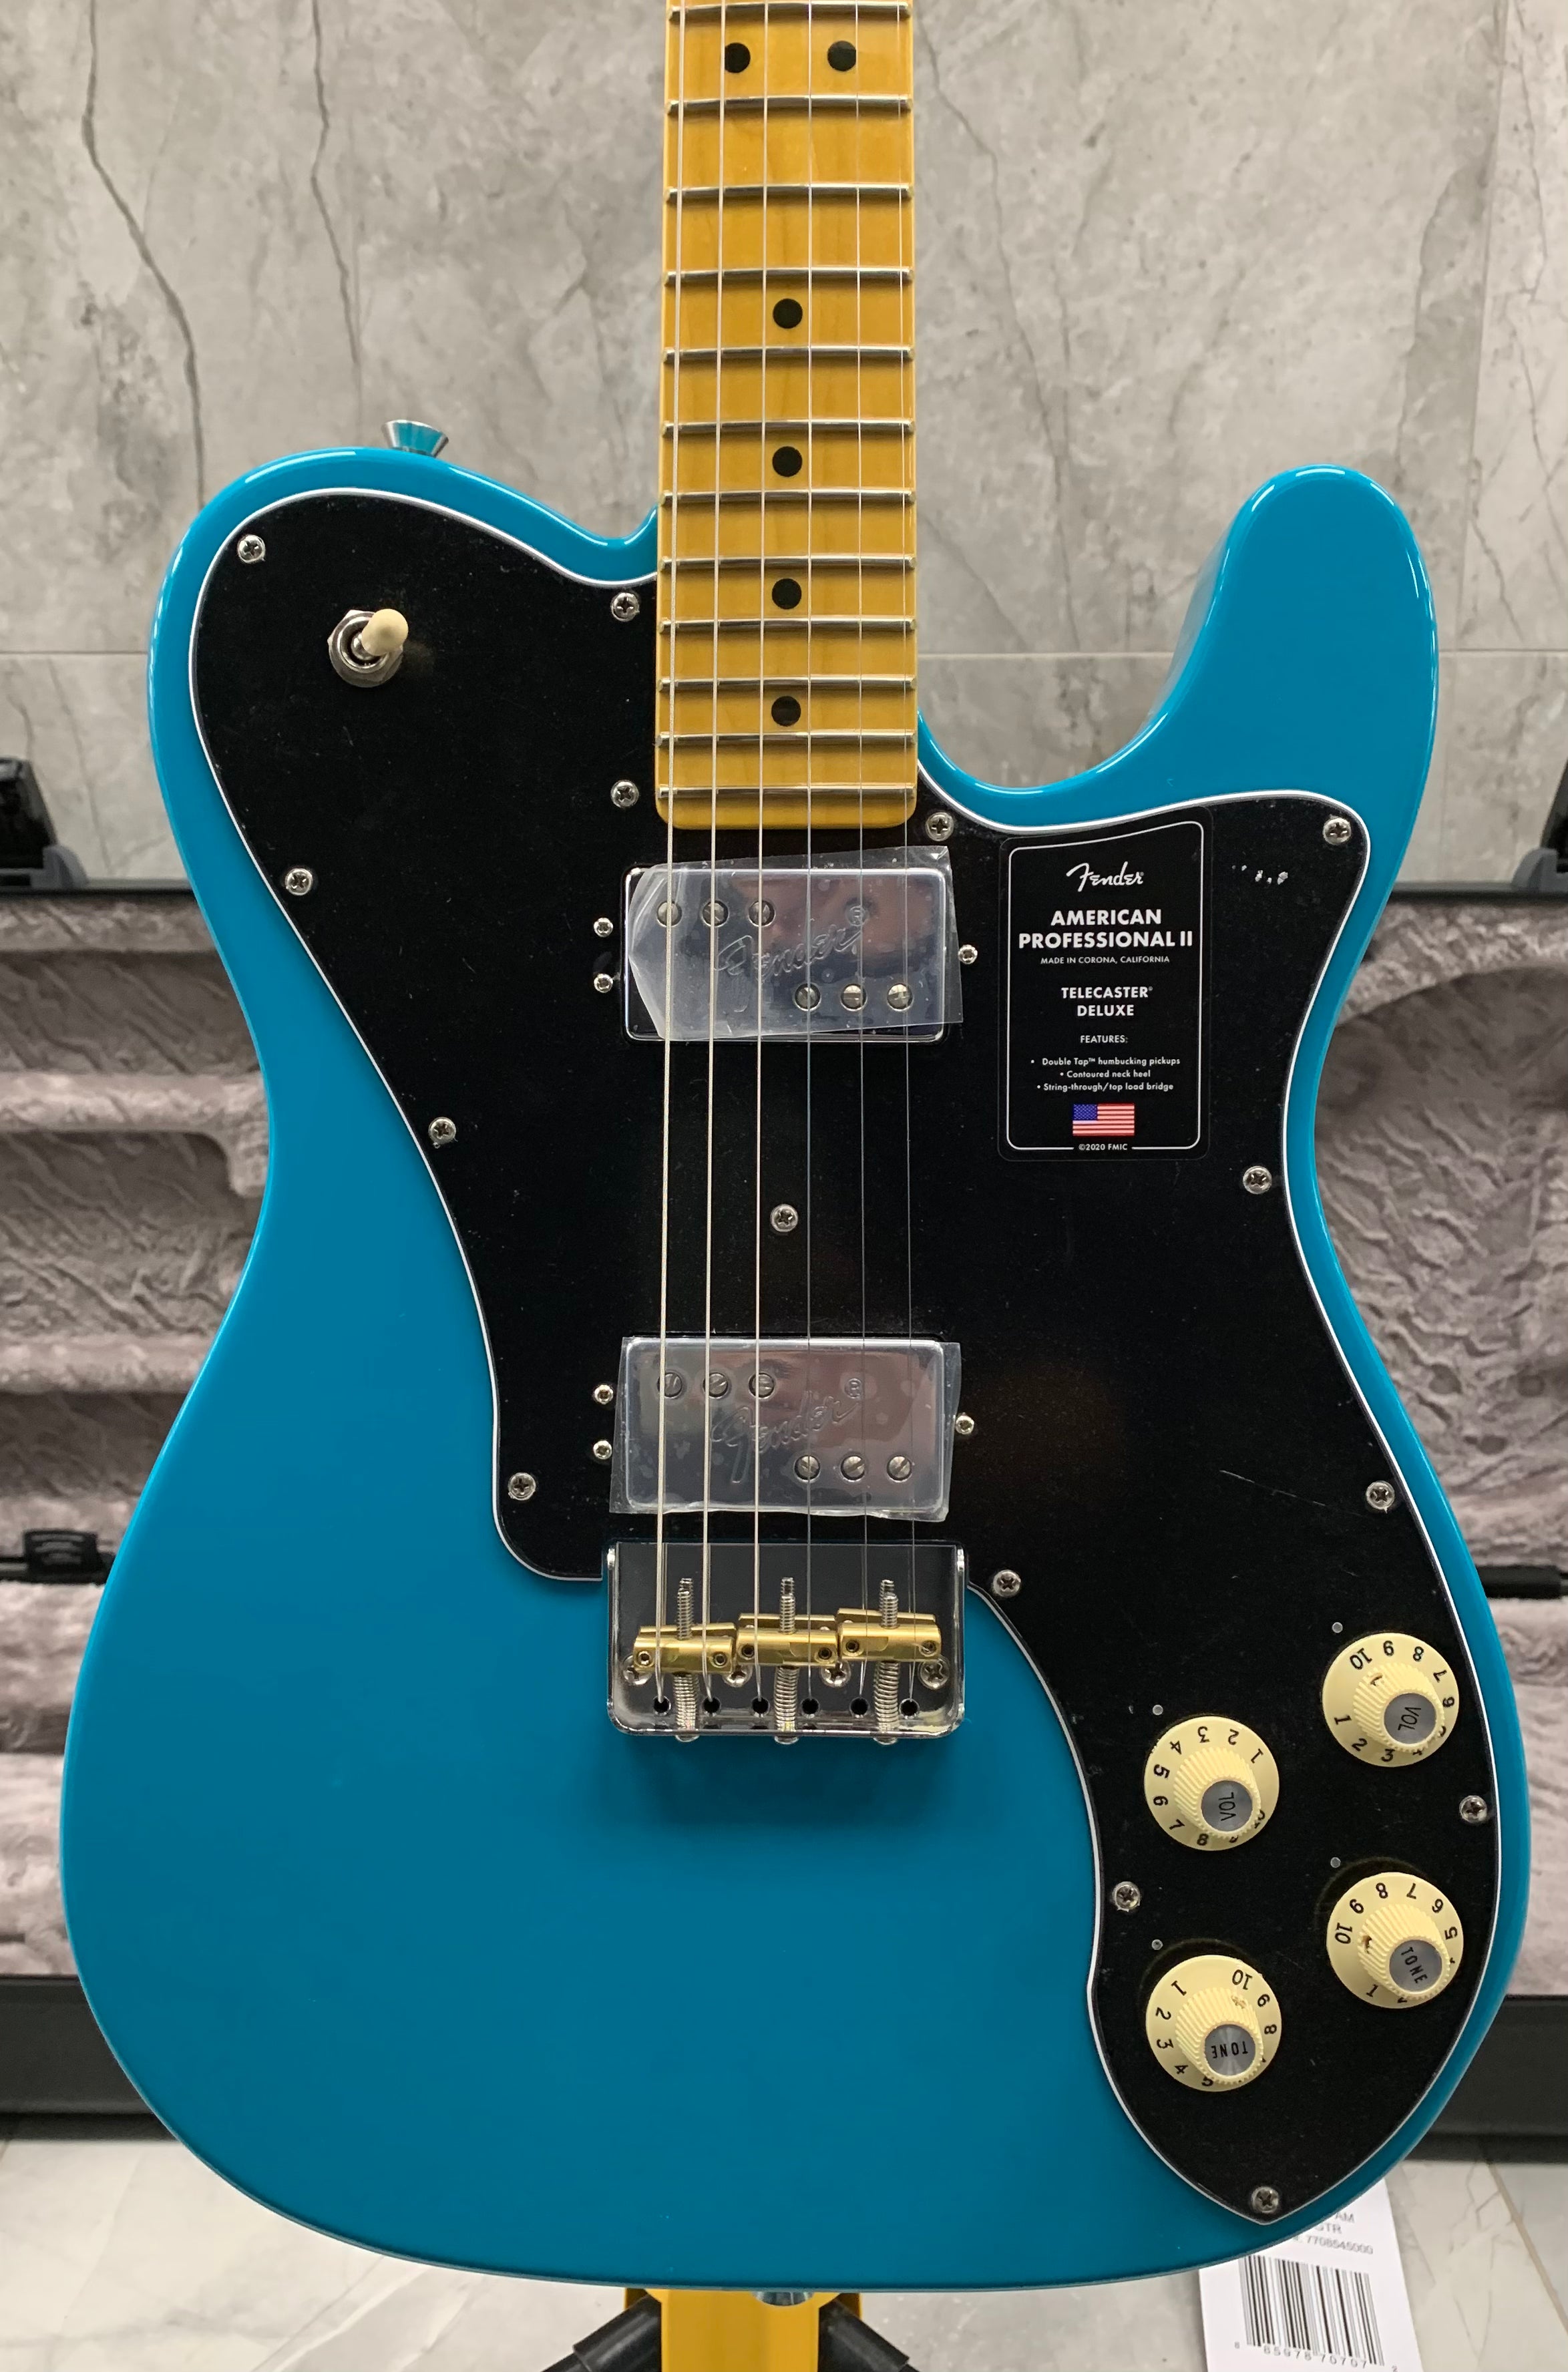 Fender American Professional II Telecaster Deluxe Maple Fingerboard Miami Blue F-0113962719 SERIAL NUMBER US22043942 - 8.0 LBS